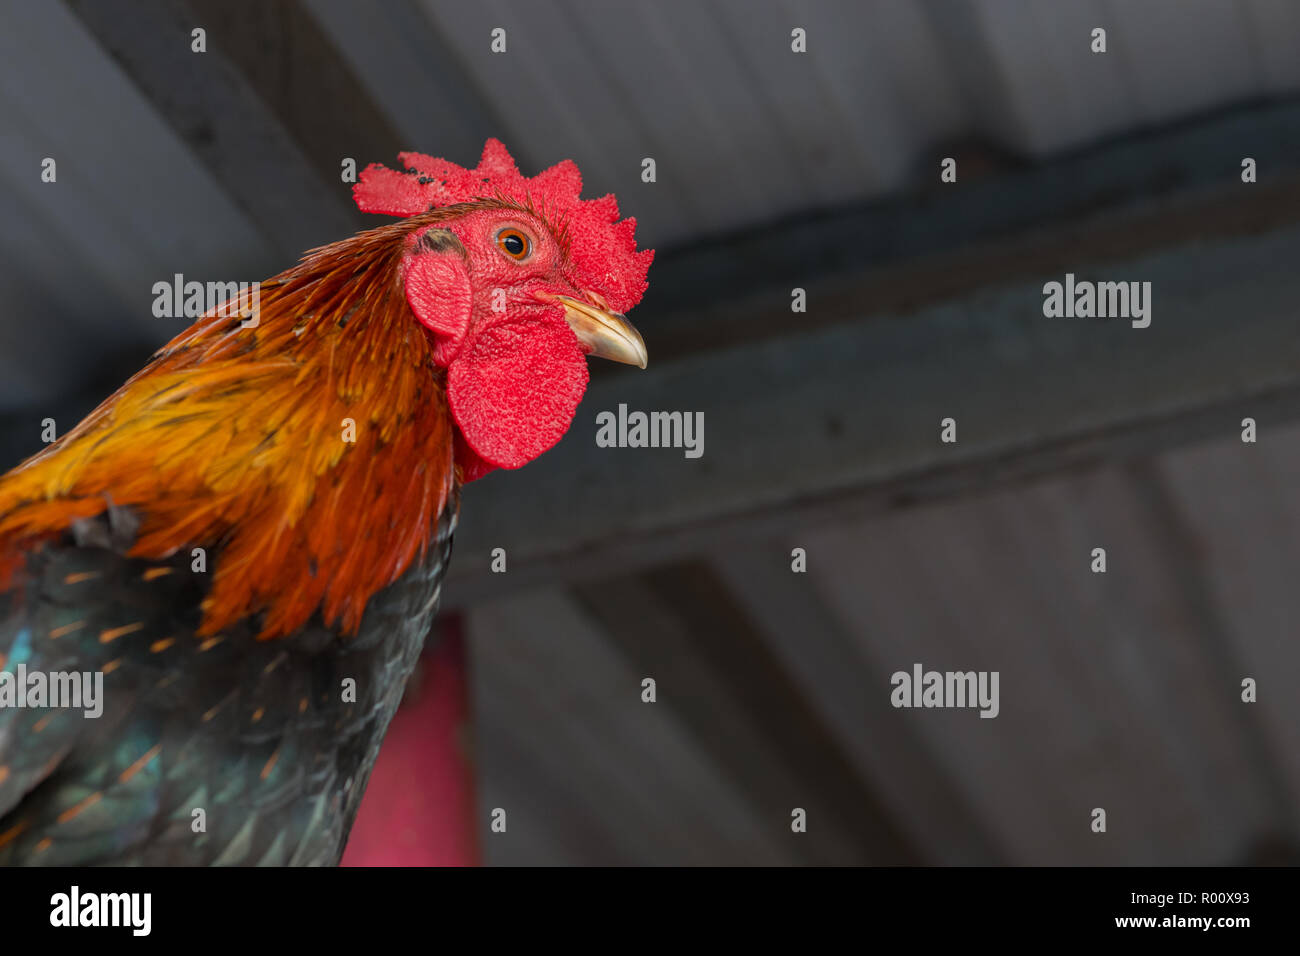 Thai rooster Stock Photo